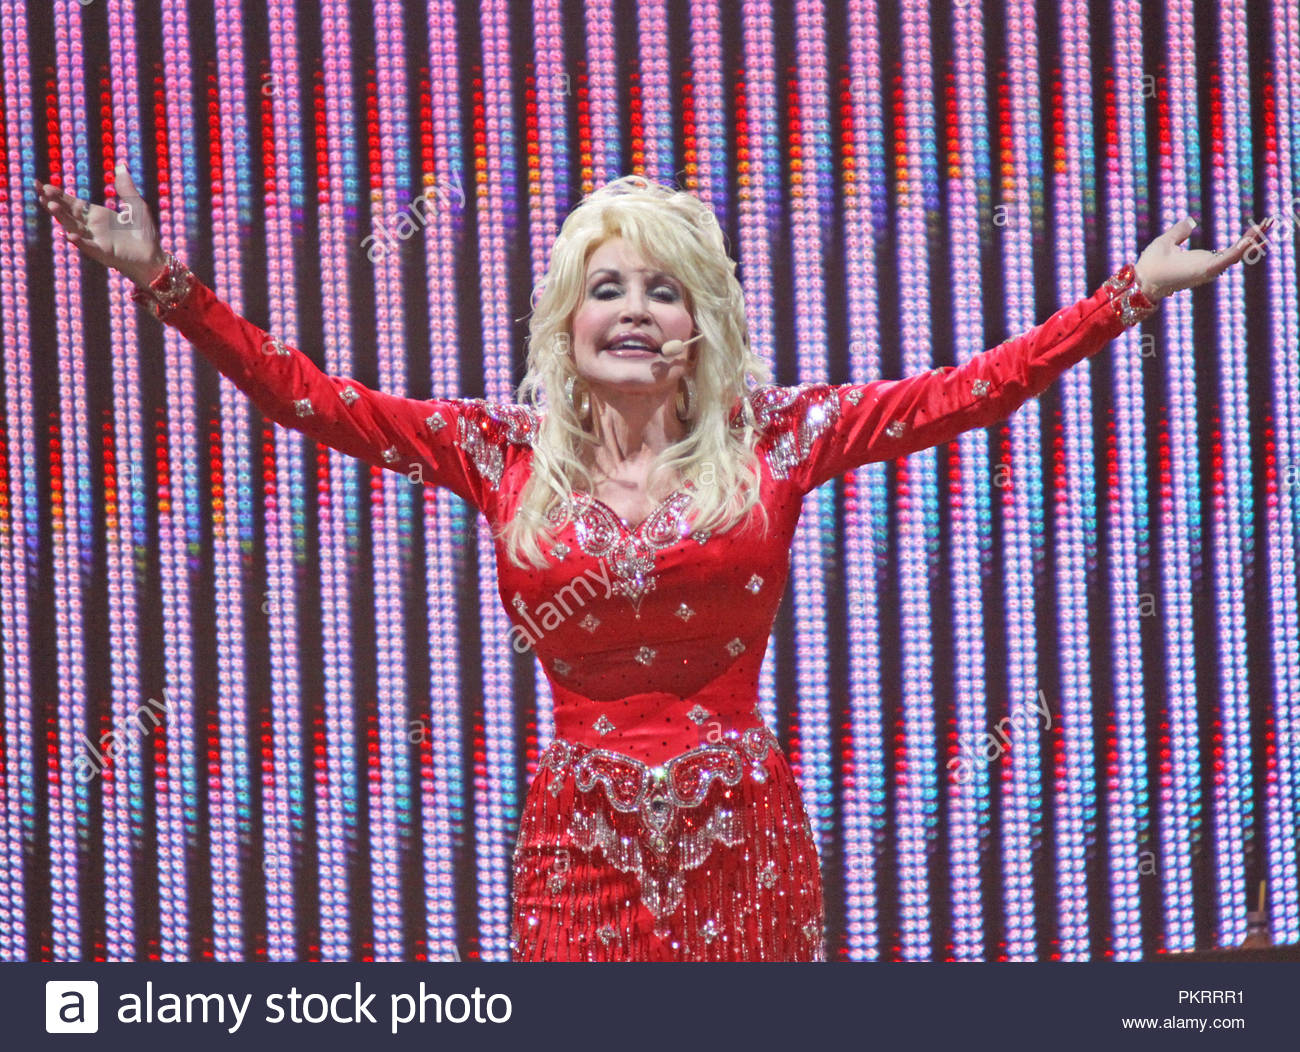 Dolly Rebecca Parton Is An American Singer Stock Photos & Dolly Rebecca Parton Is An ...1300 x 1052